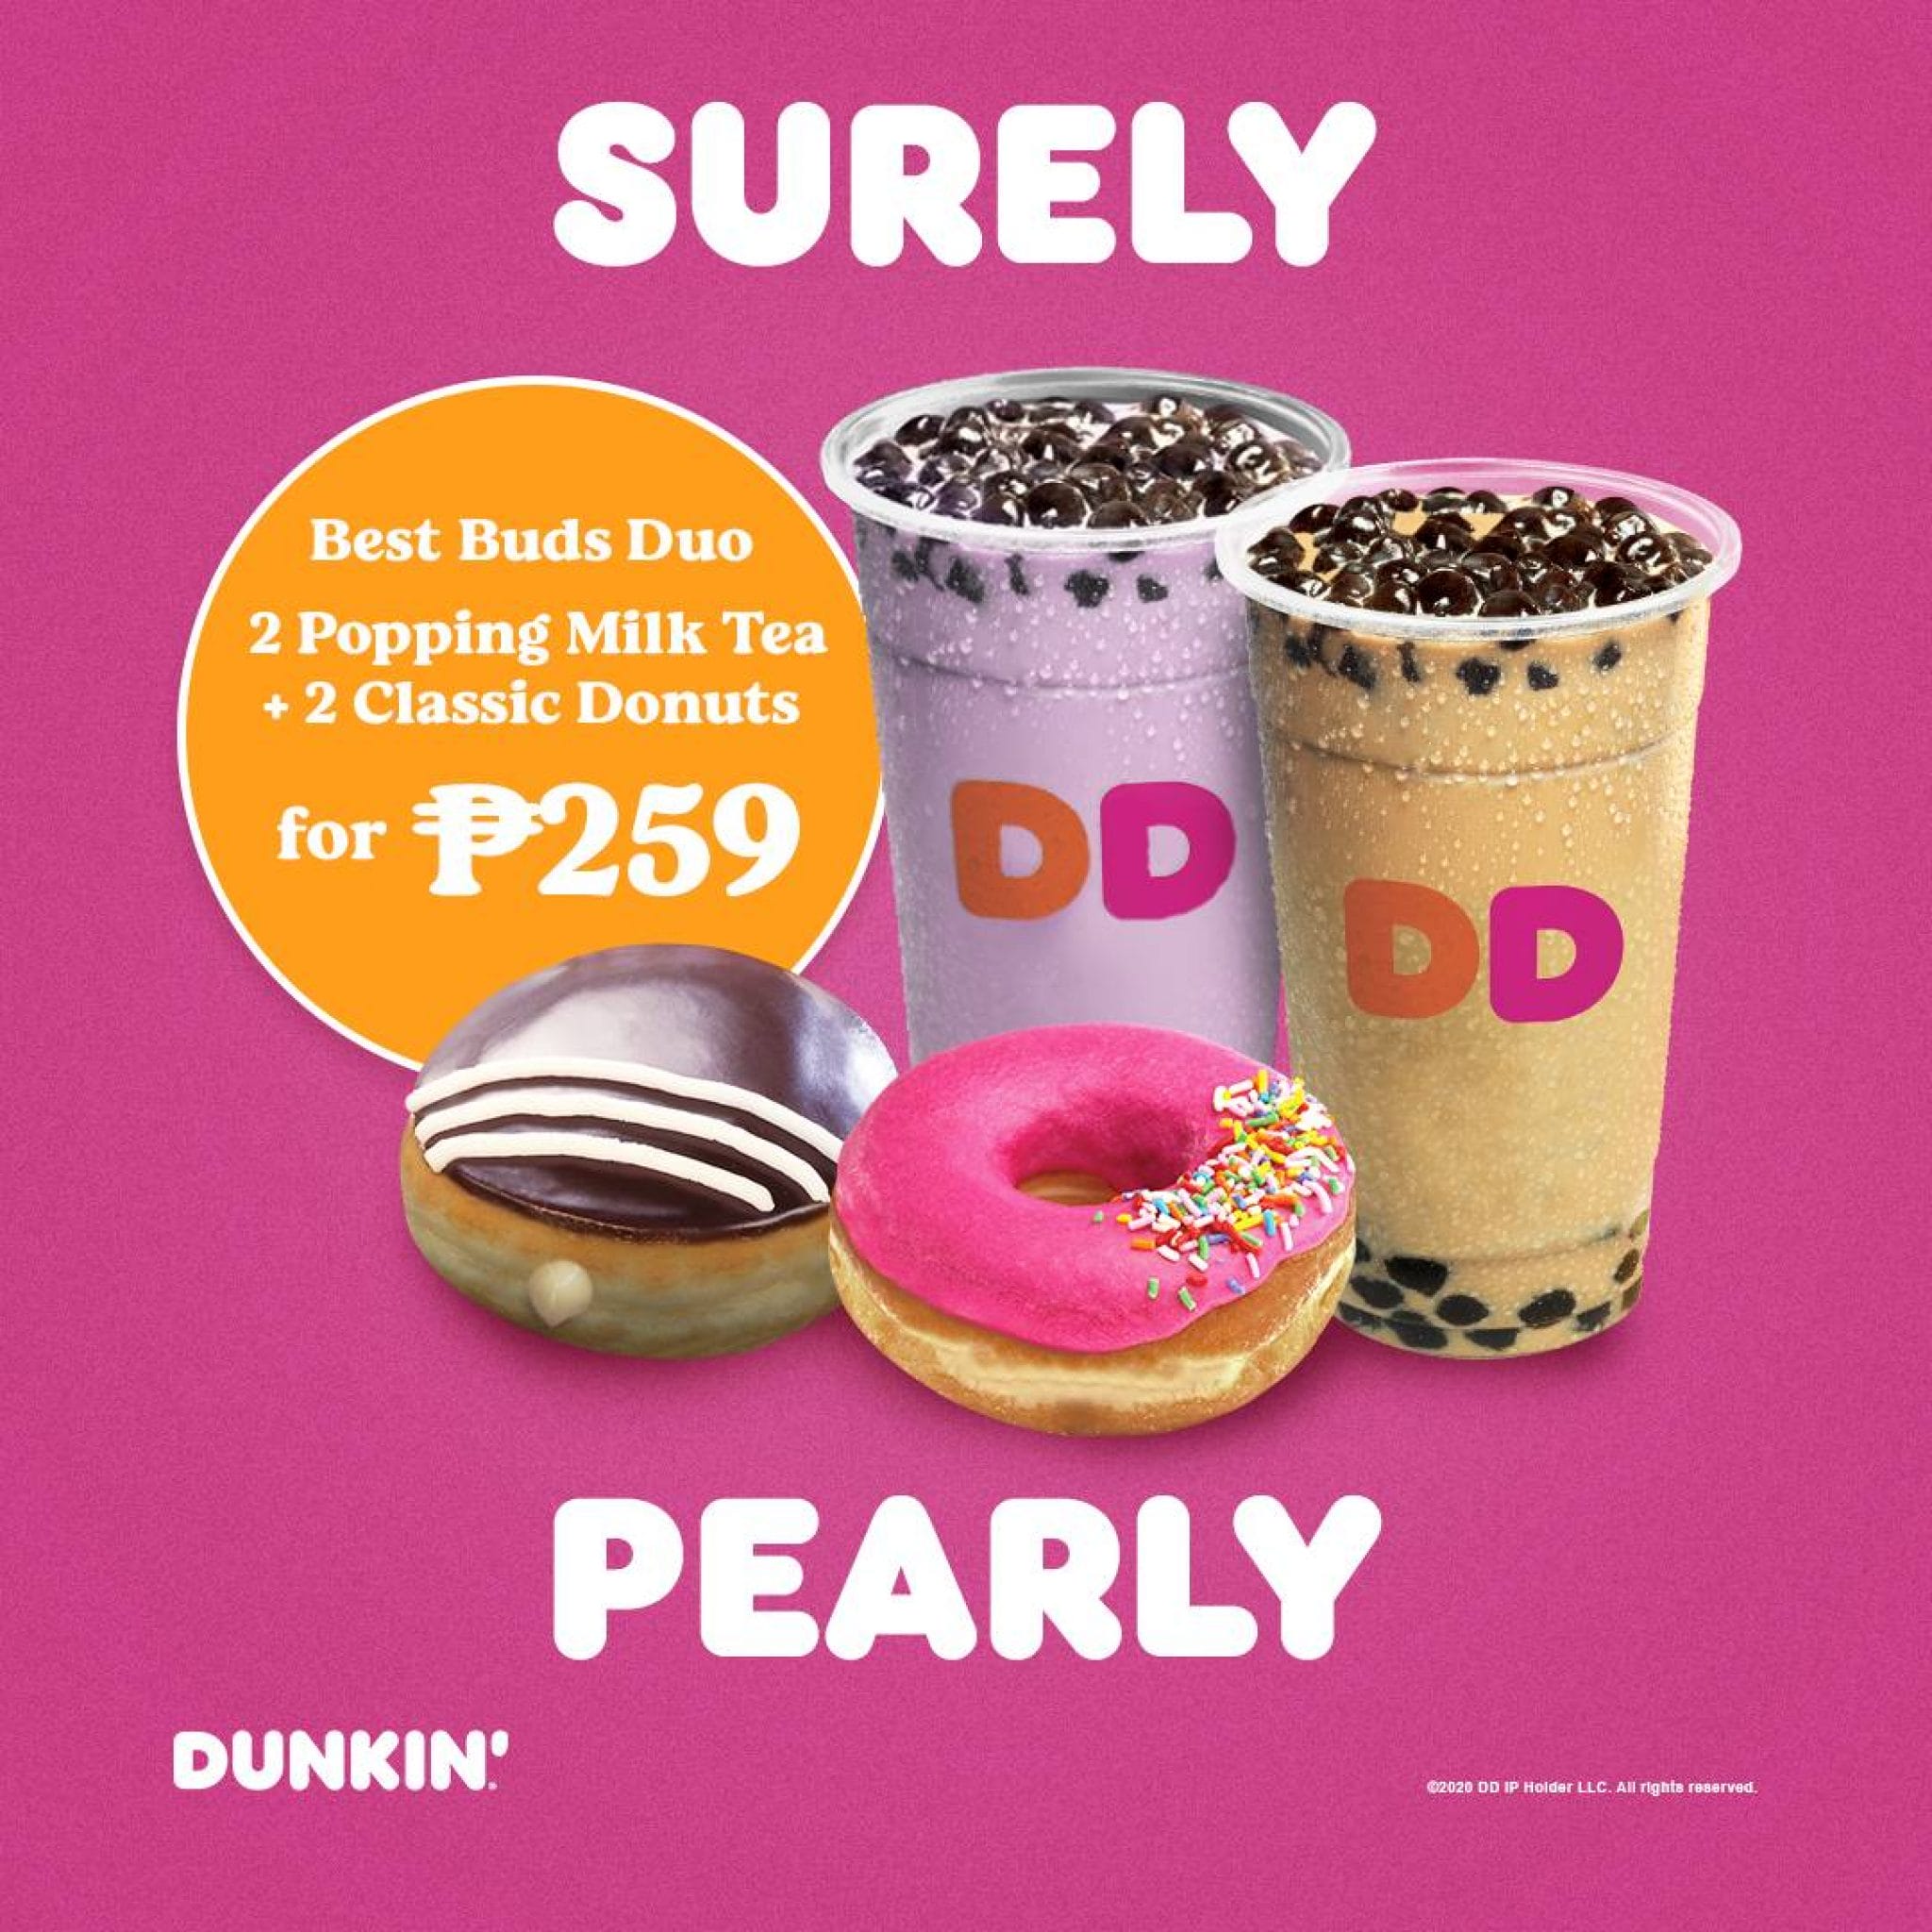 Dunkin Donuts Best Buds Duo Two Popping Milk Tea + Two Classic